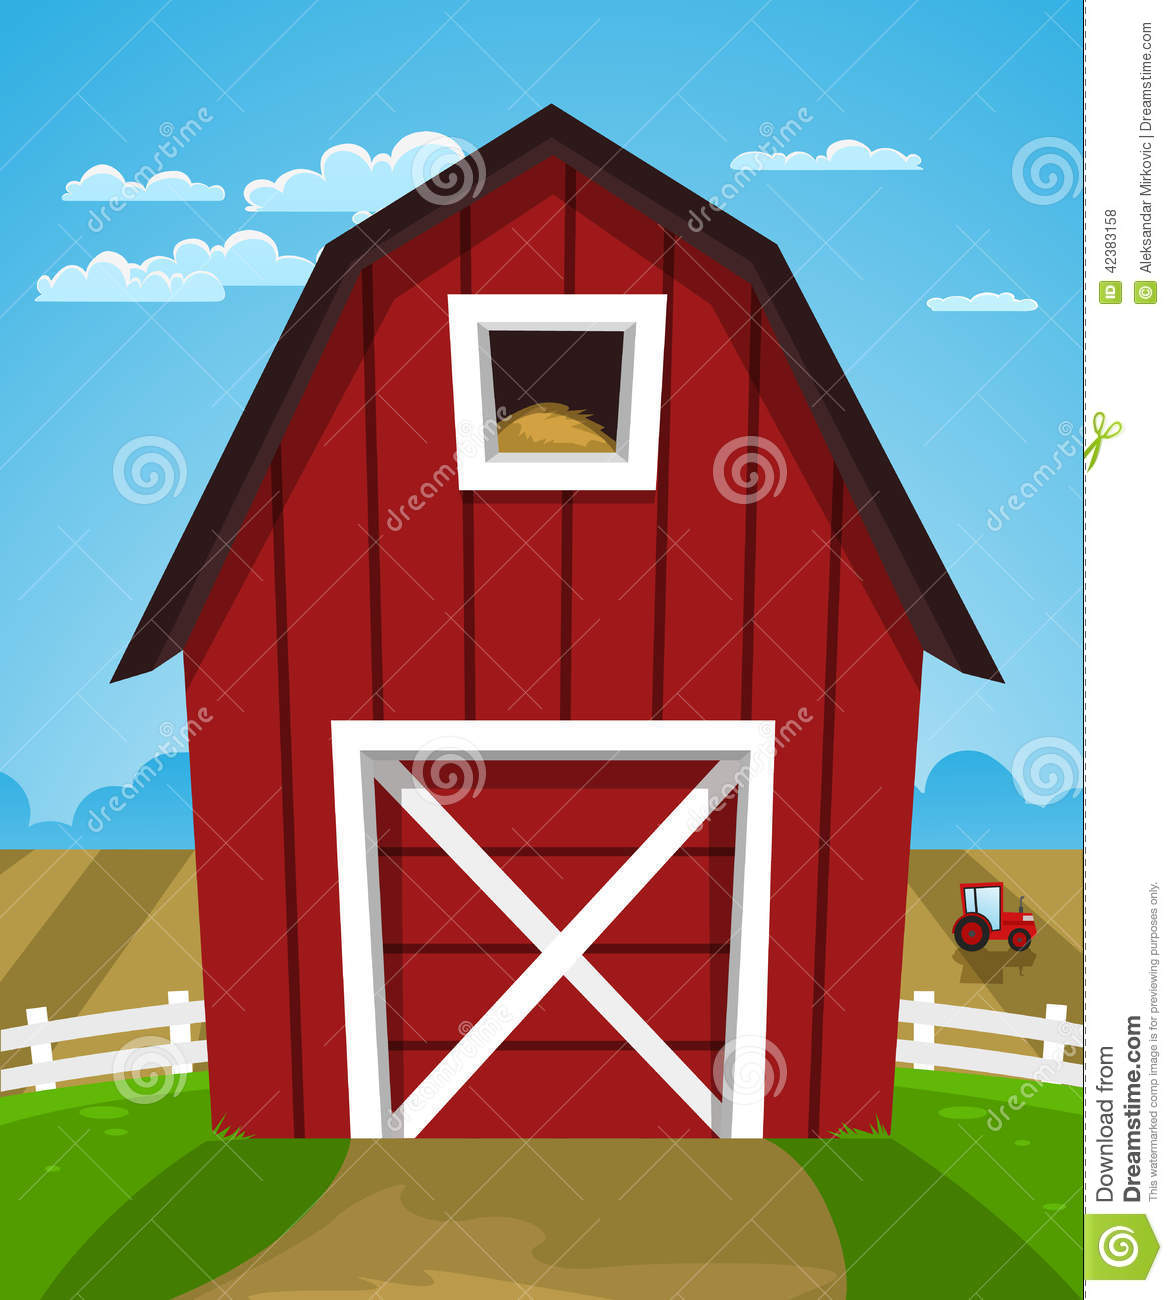 Cartoon Illustration Of Red Farm Barn With Tractor